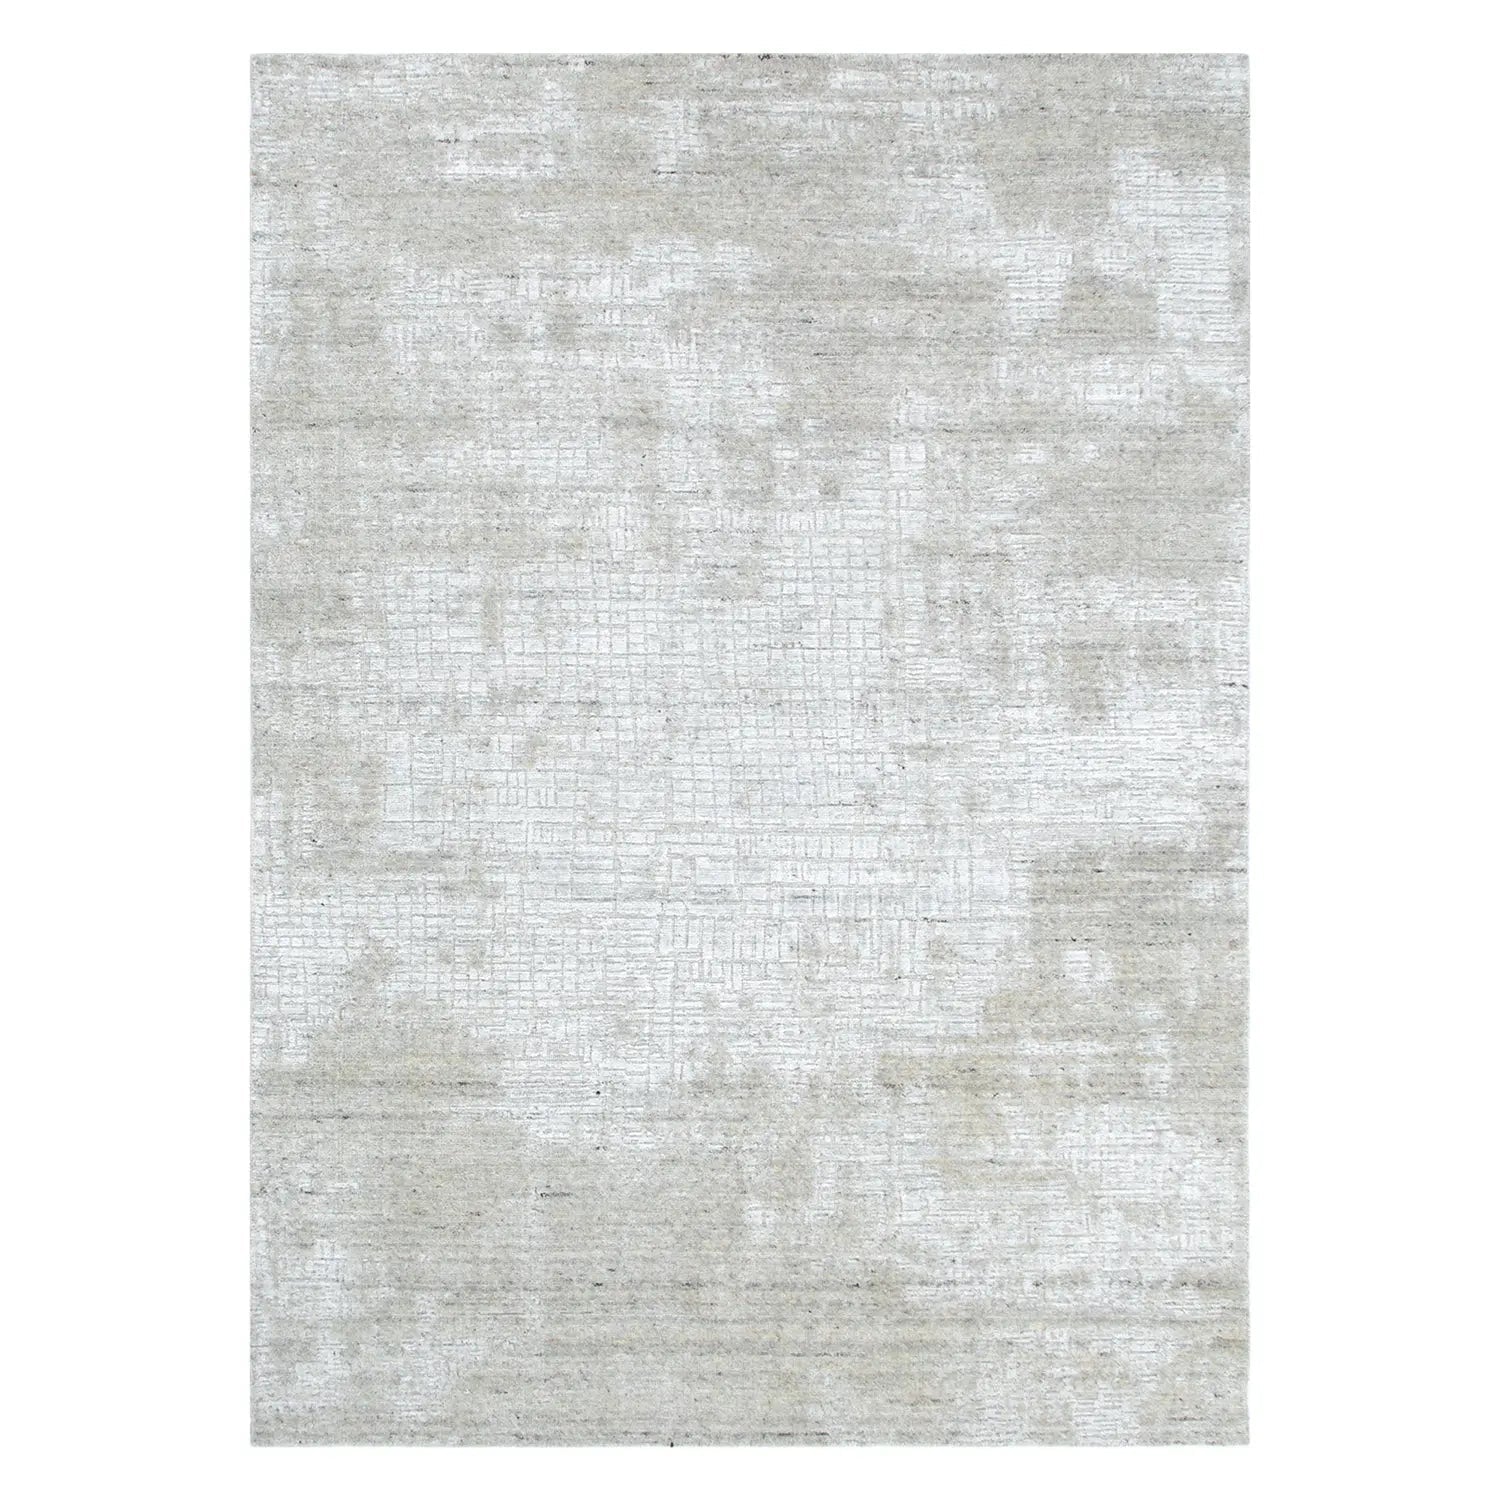 Karus Turquoise Grey Knotted Designer Rug - Rugs - Rugs a Million